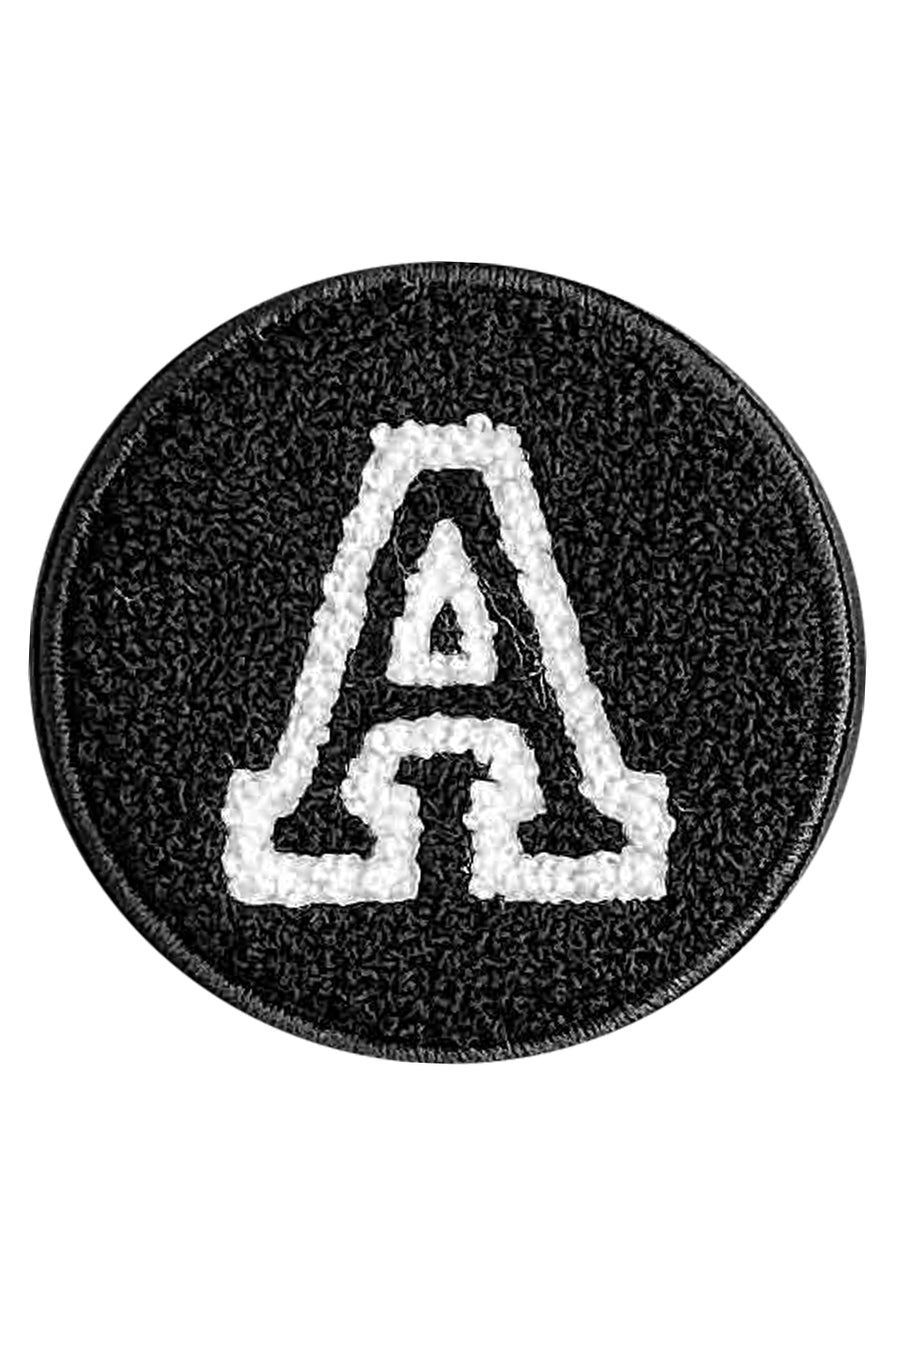 Velcro Initial Letter A Patch